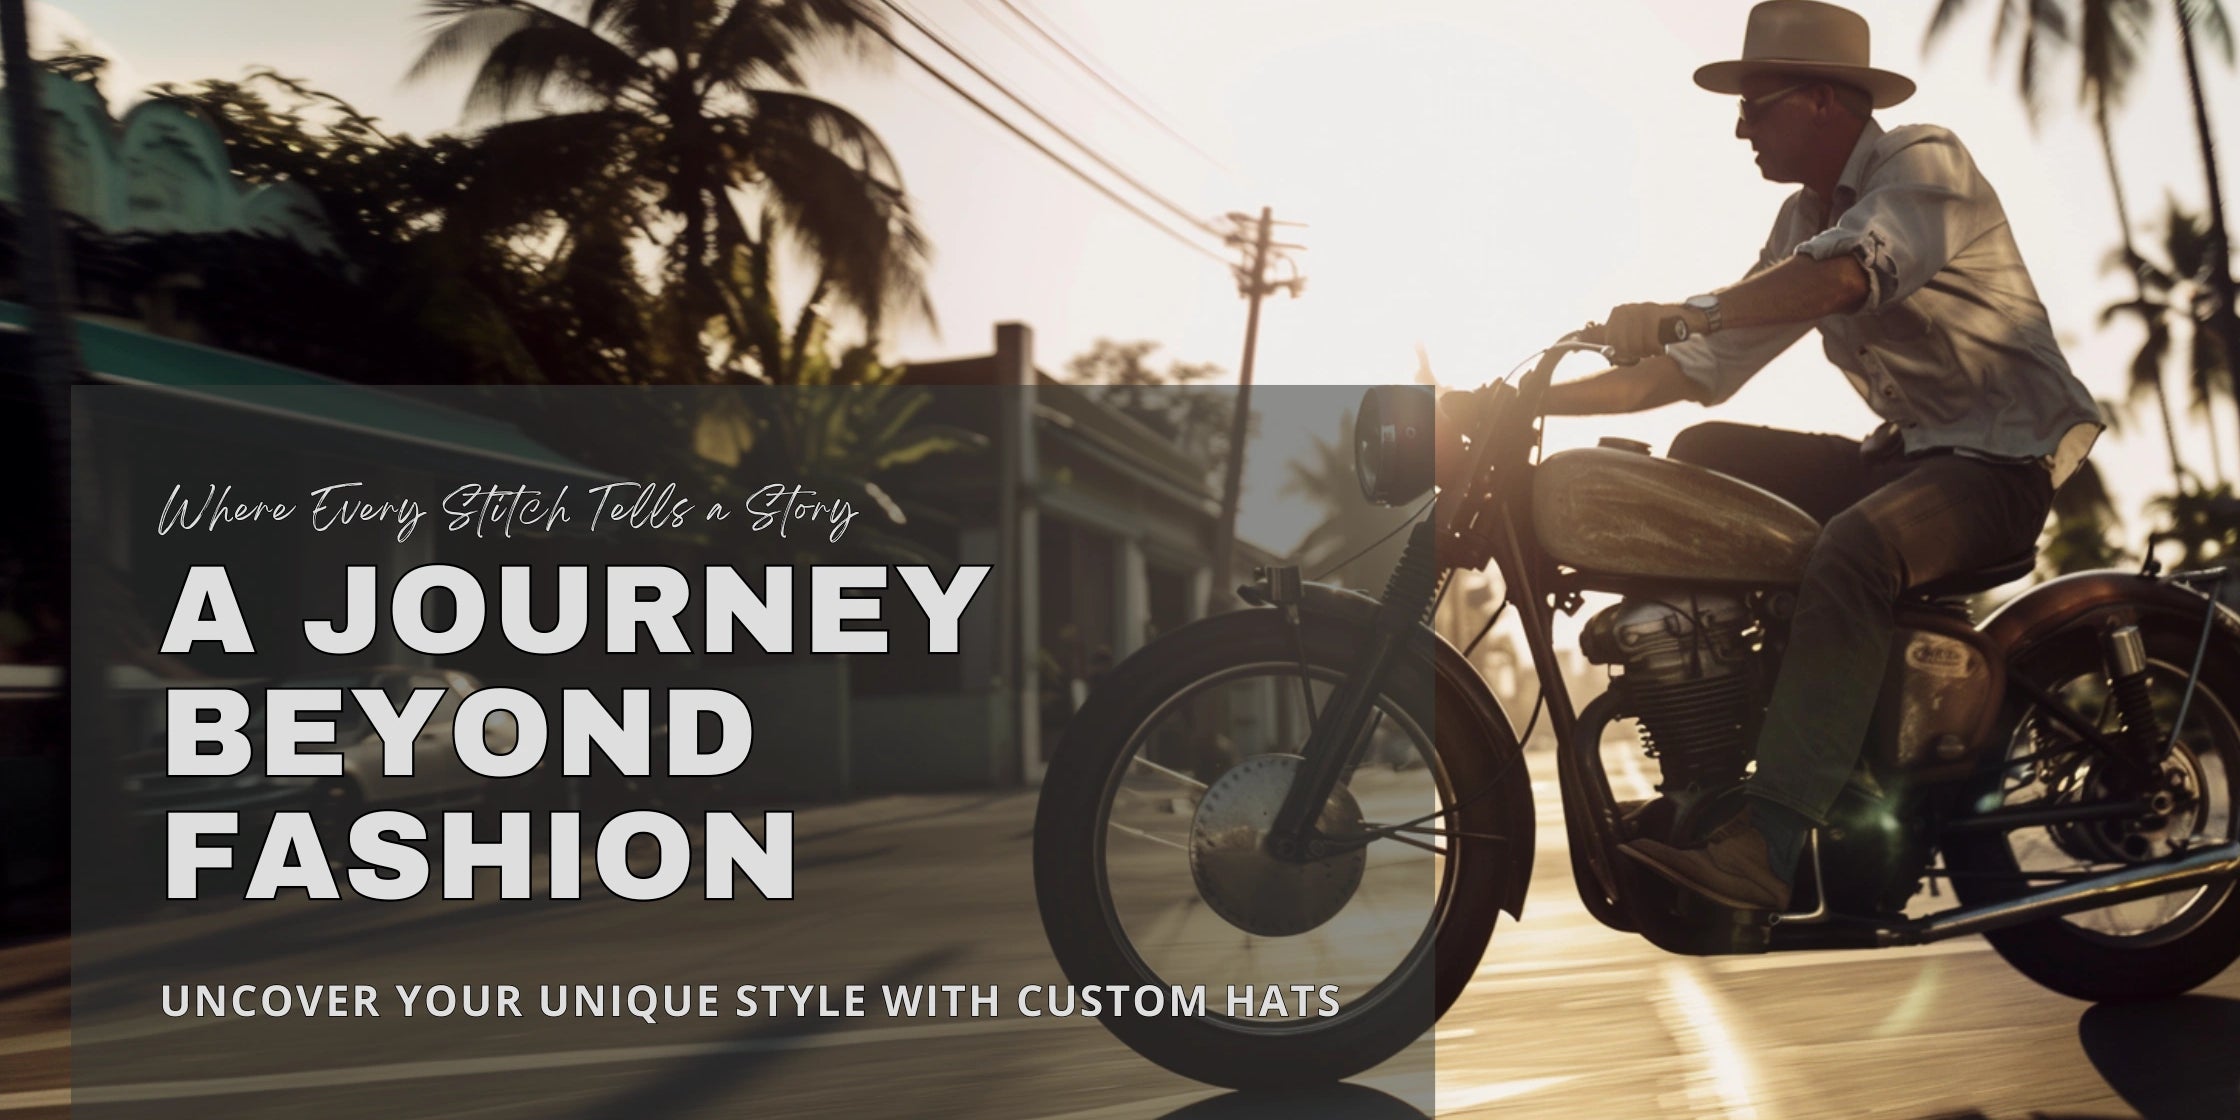 Adventurous man in a fedora riding a motorcycle at sunset, embodying the spirit of 'A Journey Beyond Fashion'